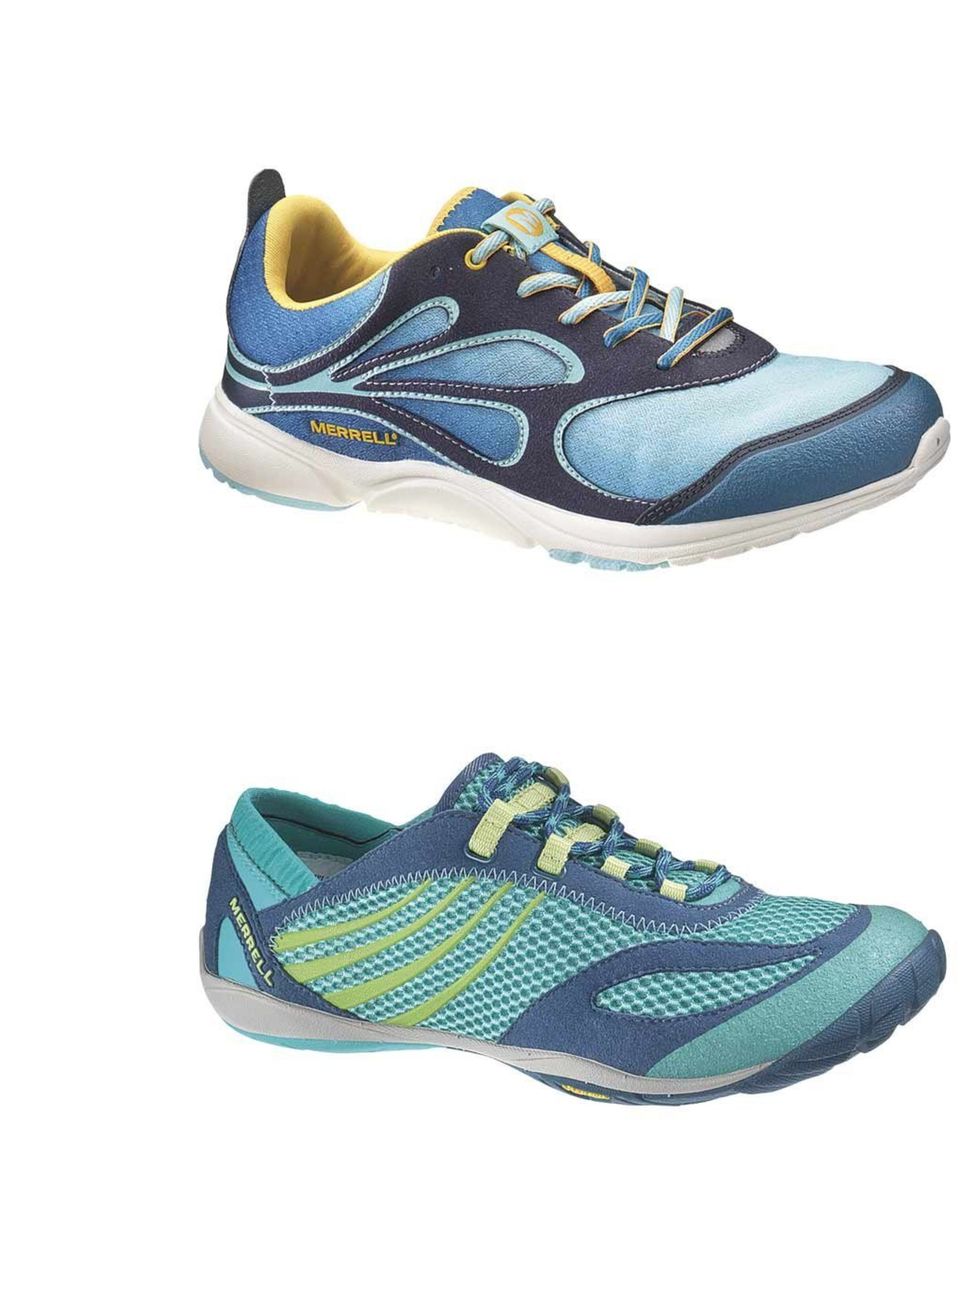 <p><strong><a href="http://www.merrell.com/UK/en/Barefoot-Women">Merrell </a>Bare Access, £75</strong></p><p><strong>Weight:</strong> around 255g for the pair</p><p><strong>Pros: </strong>These are really lightweight at just 255g for the pair, but you sti